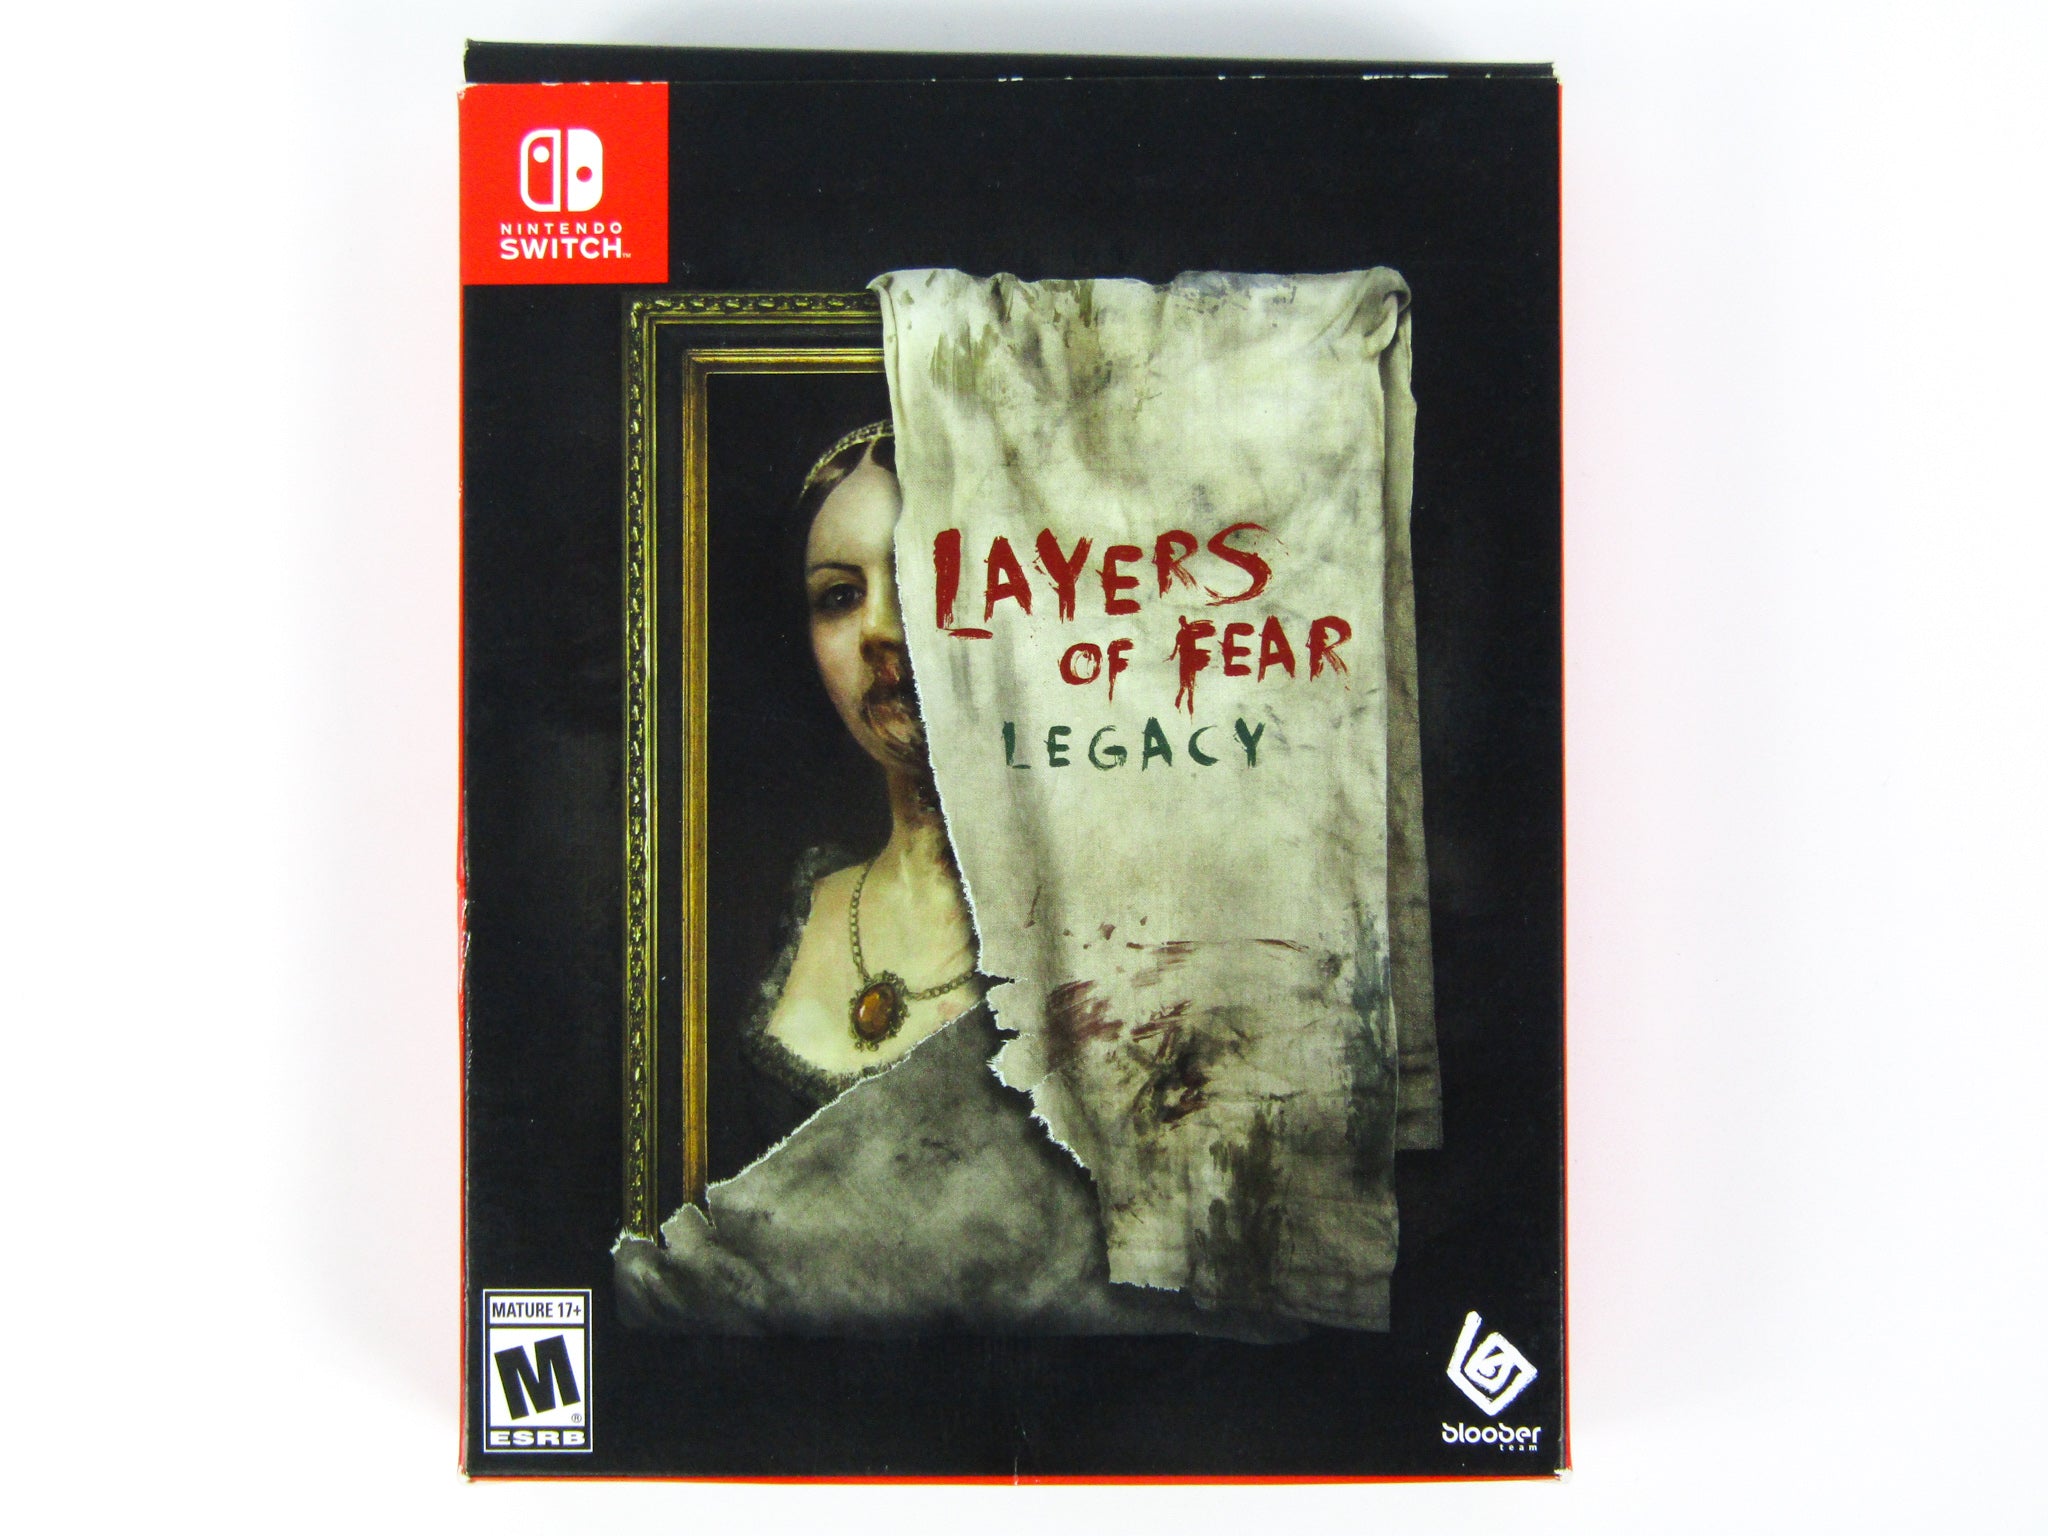 Layers of Fear Legacy for the Nintendo Switch - Limited Run Games - Sealed